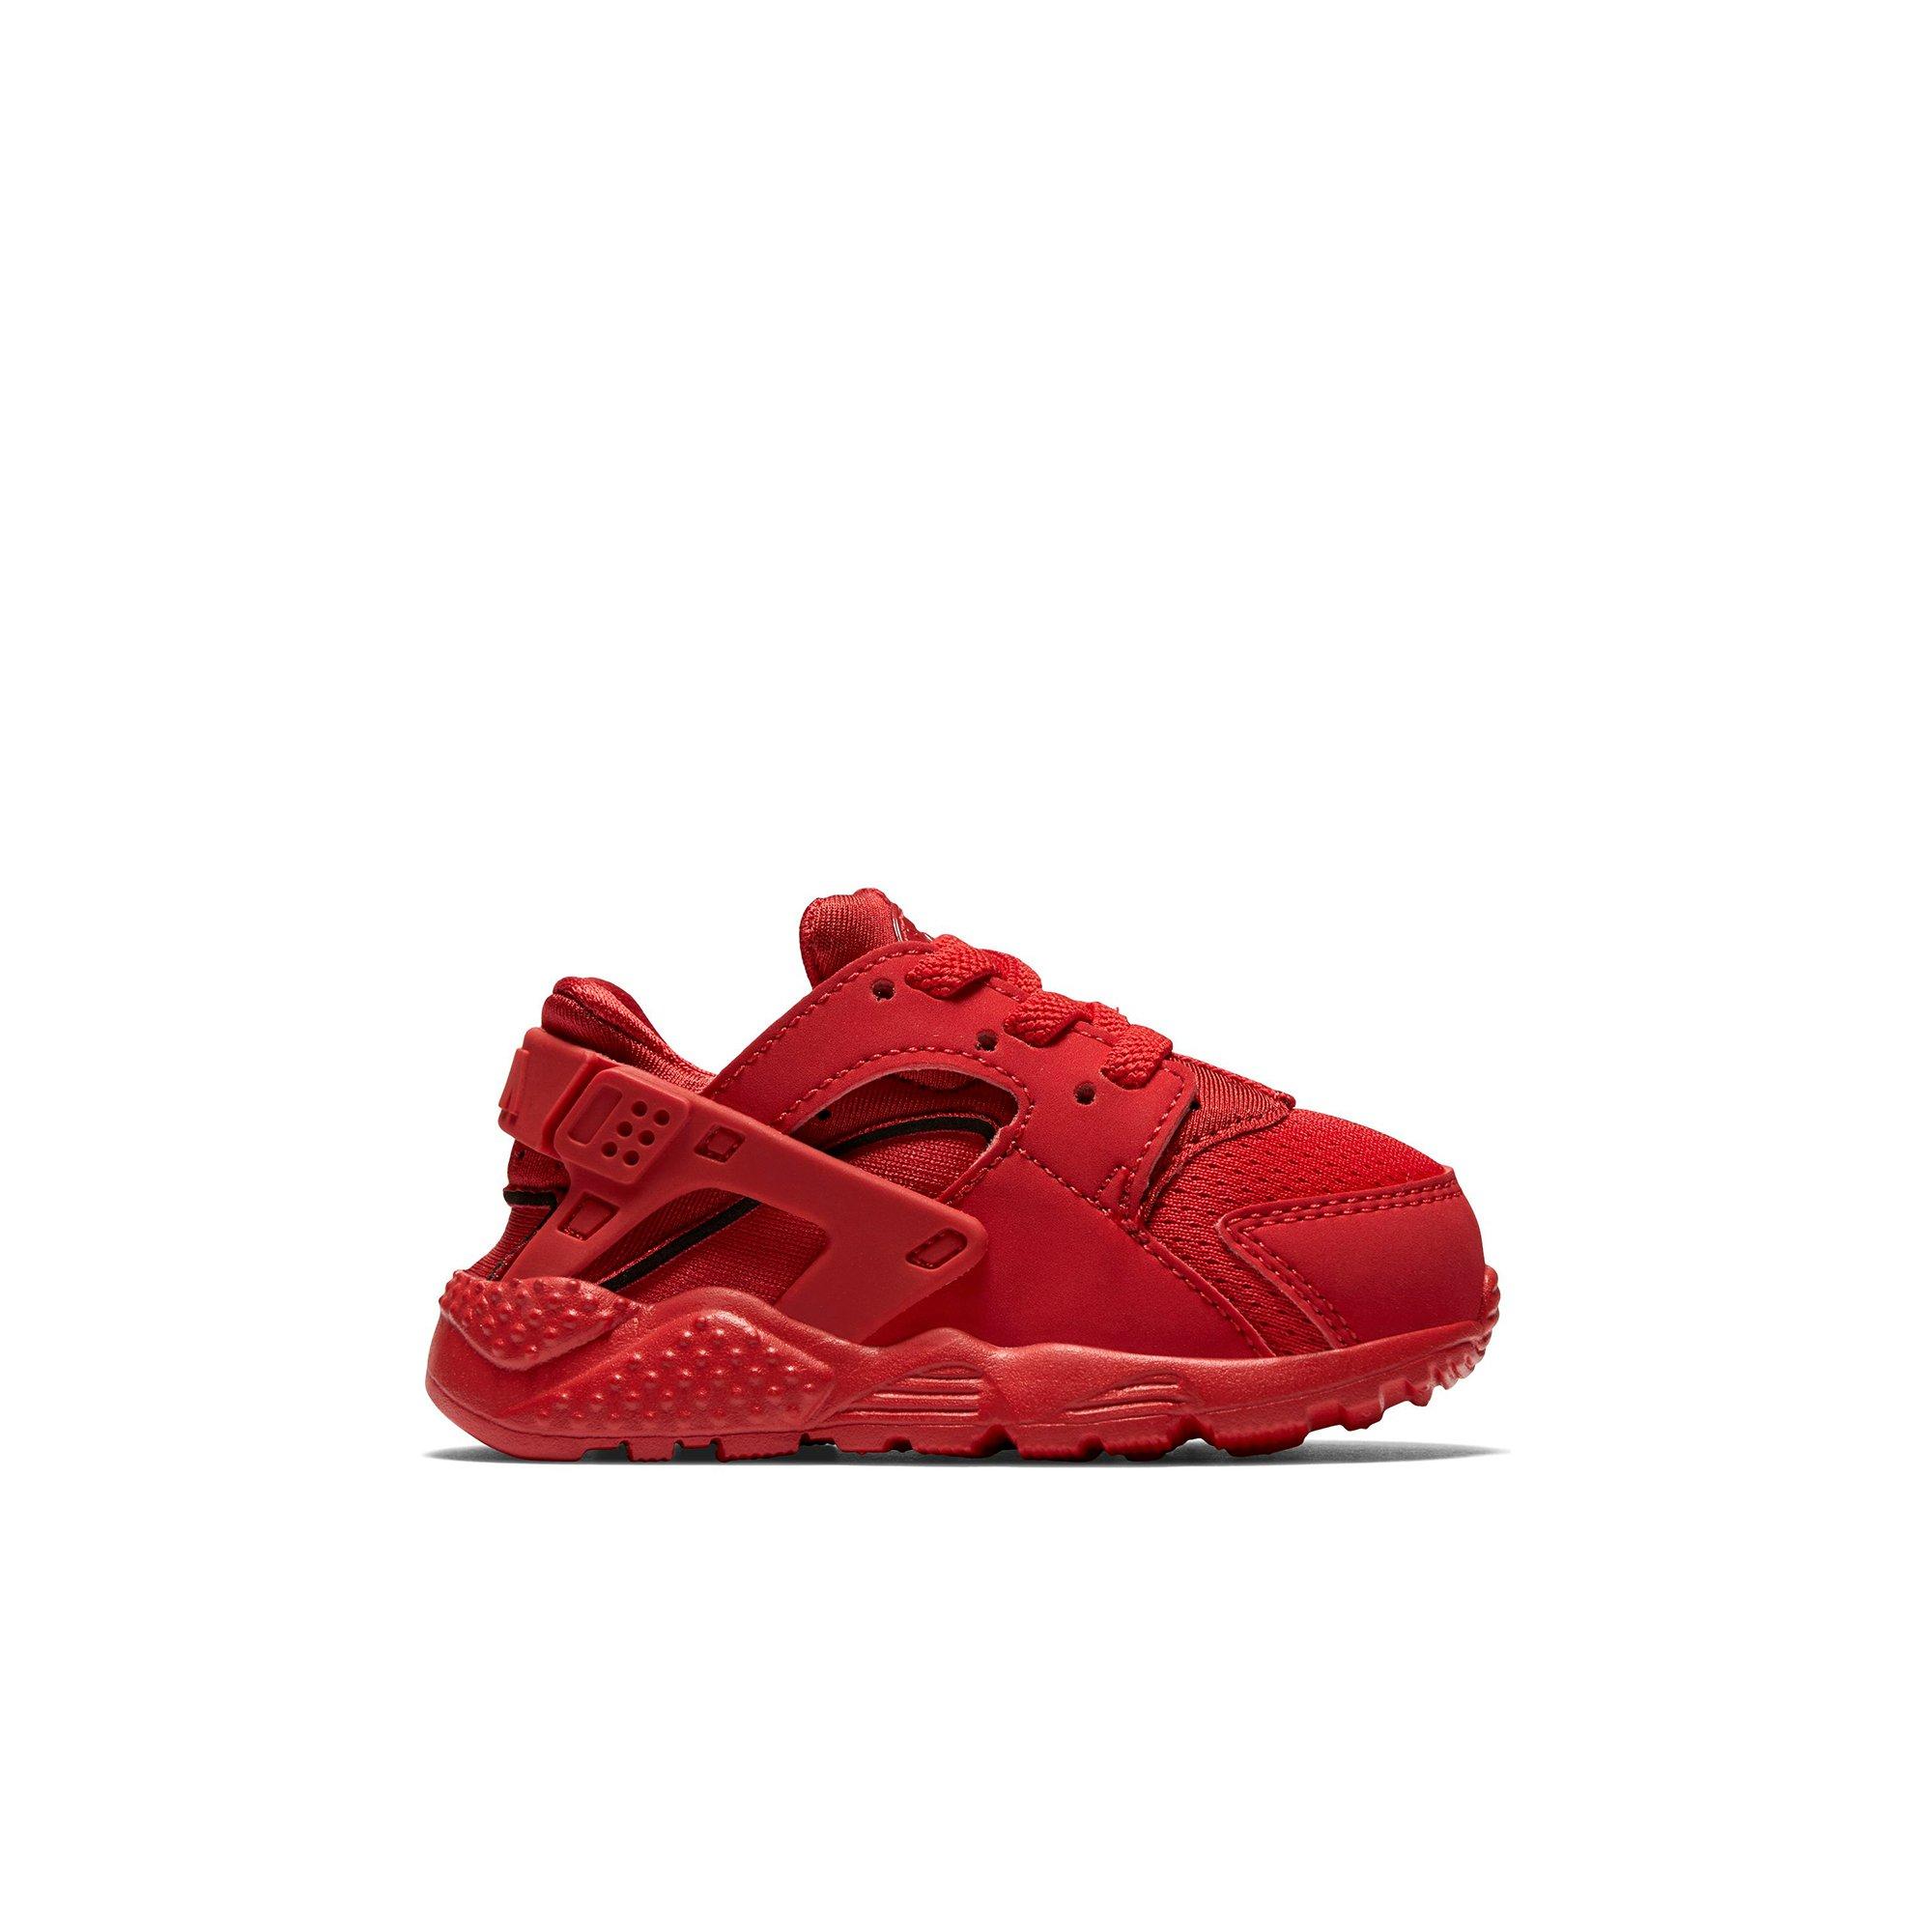 red huaraches youth